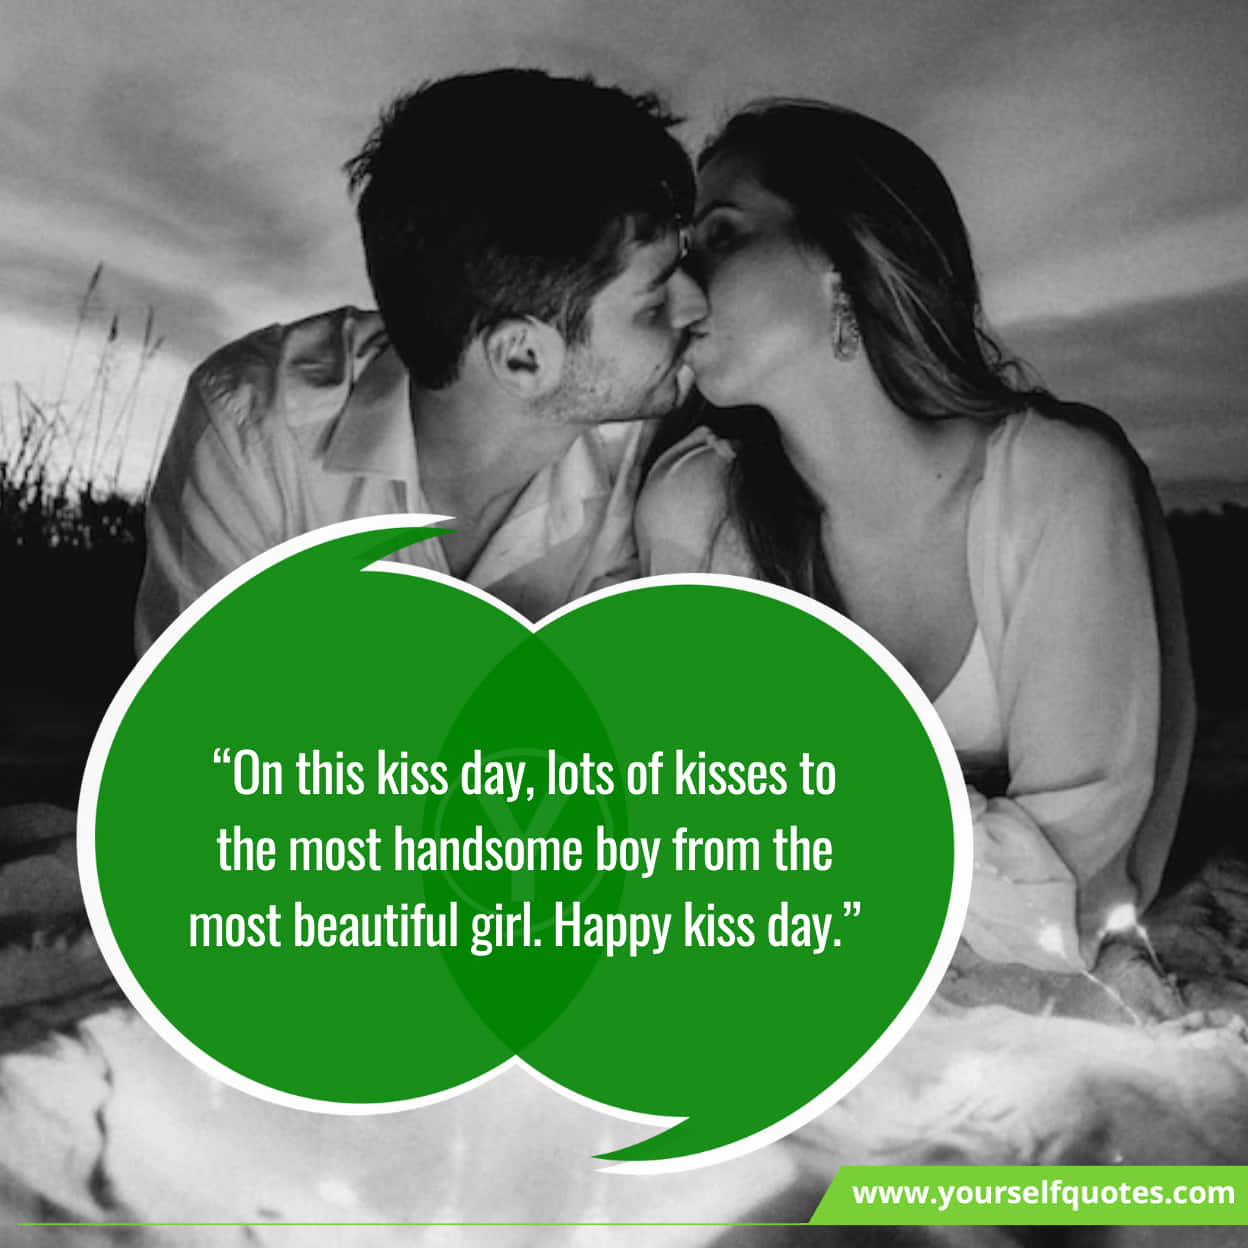 Sweet Kiss Day Sayings To Share